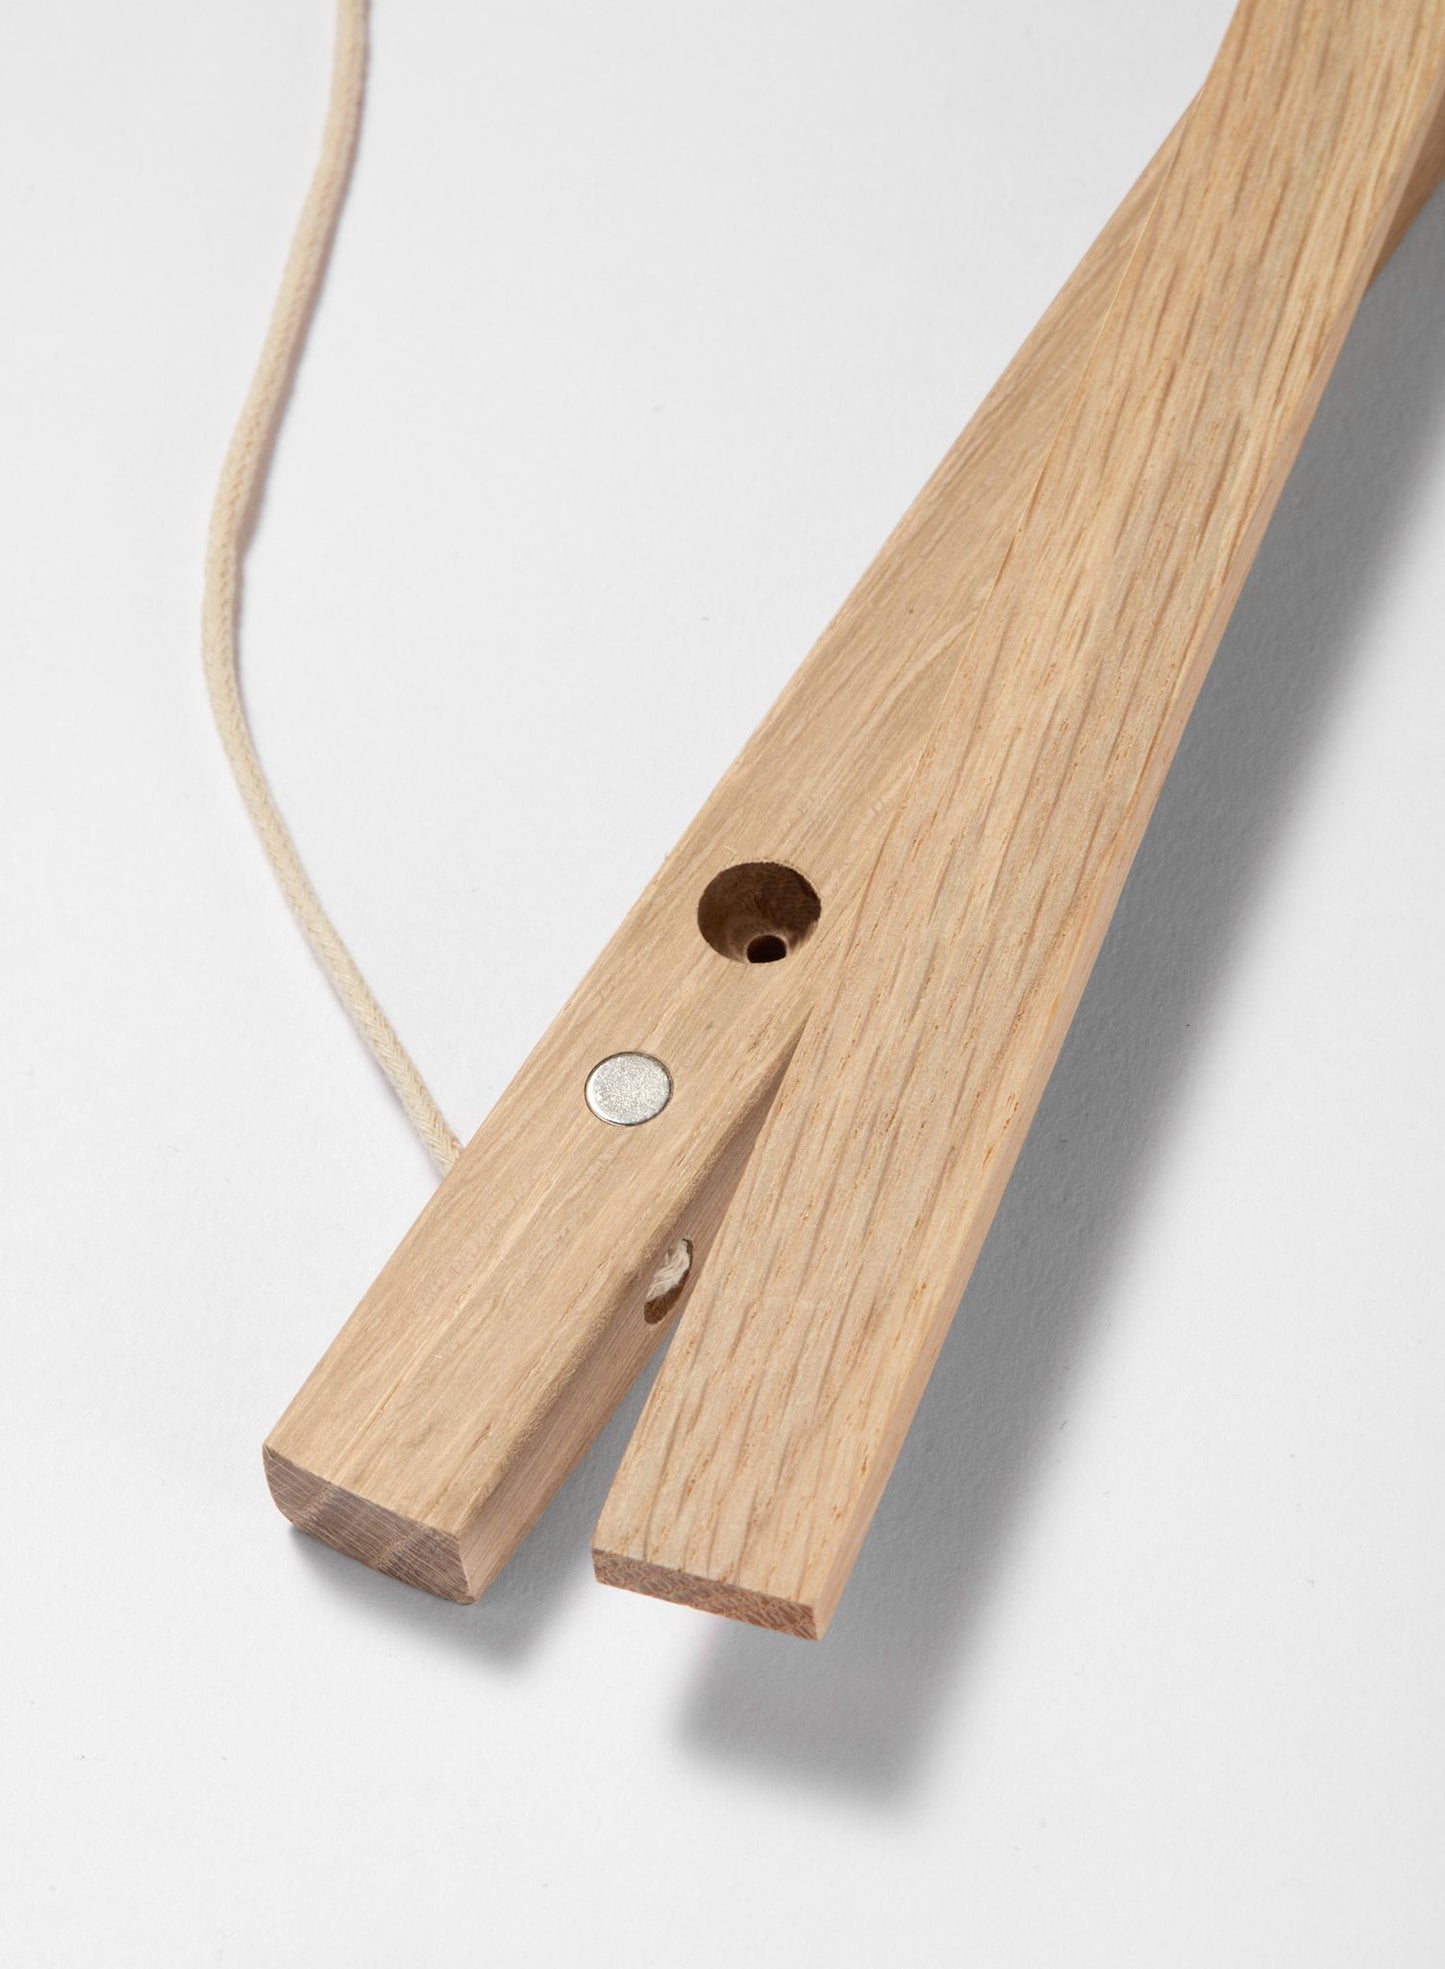 Scandinavian solid oak poster wall hanger by Opposite Wall - Corner of the poster hanger - Size 24 inches